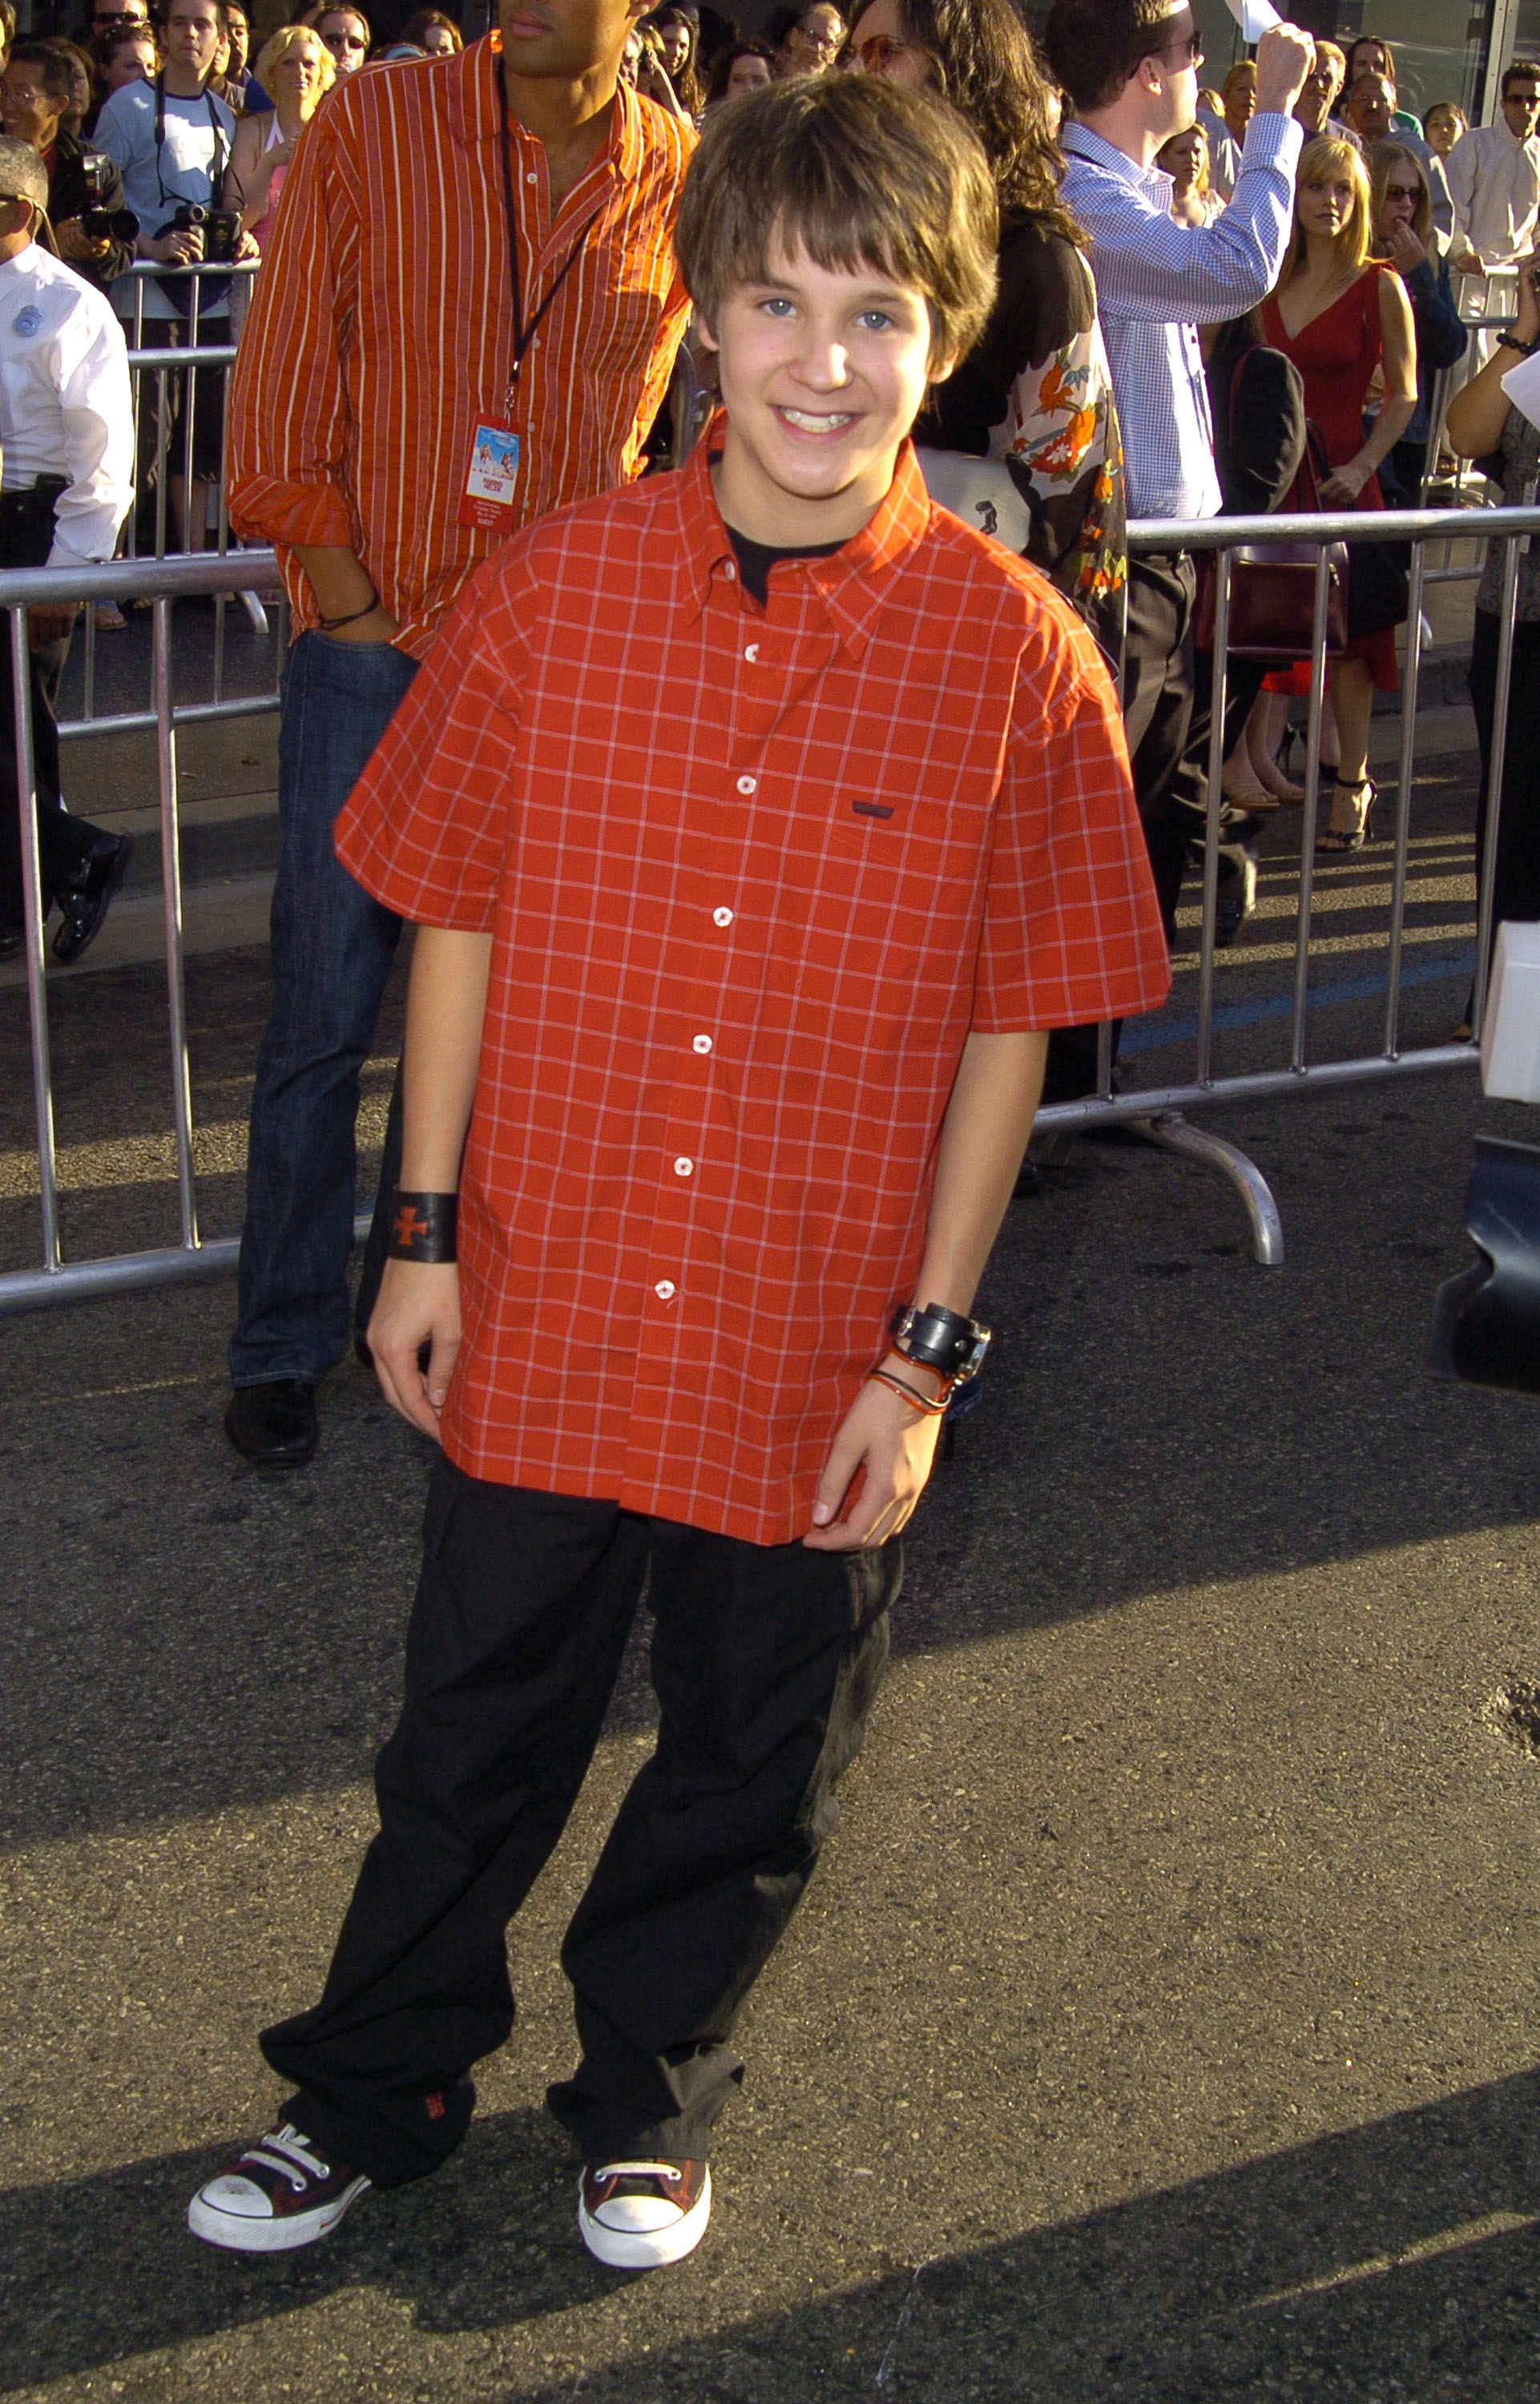 Smiling Devon in a checkered, short-sleeved shirt, loose pants, and sneakers